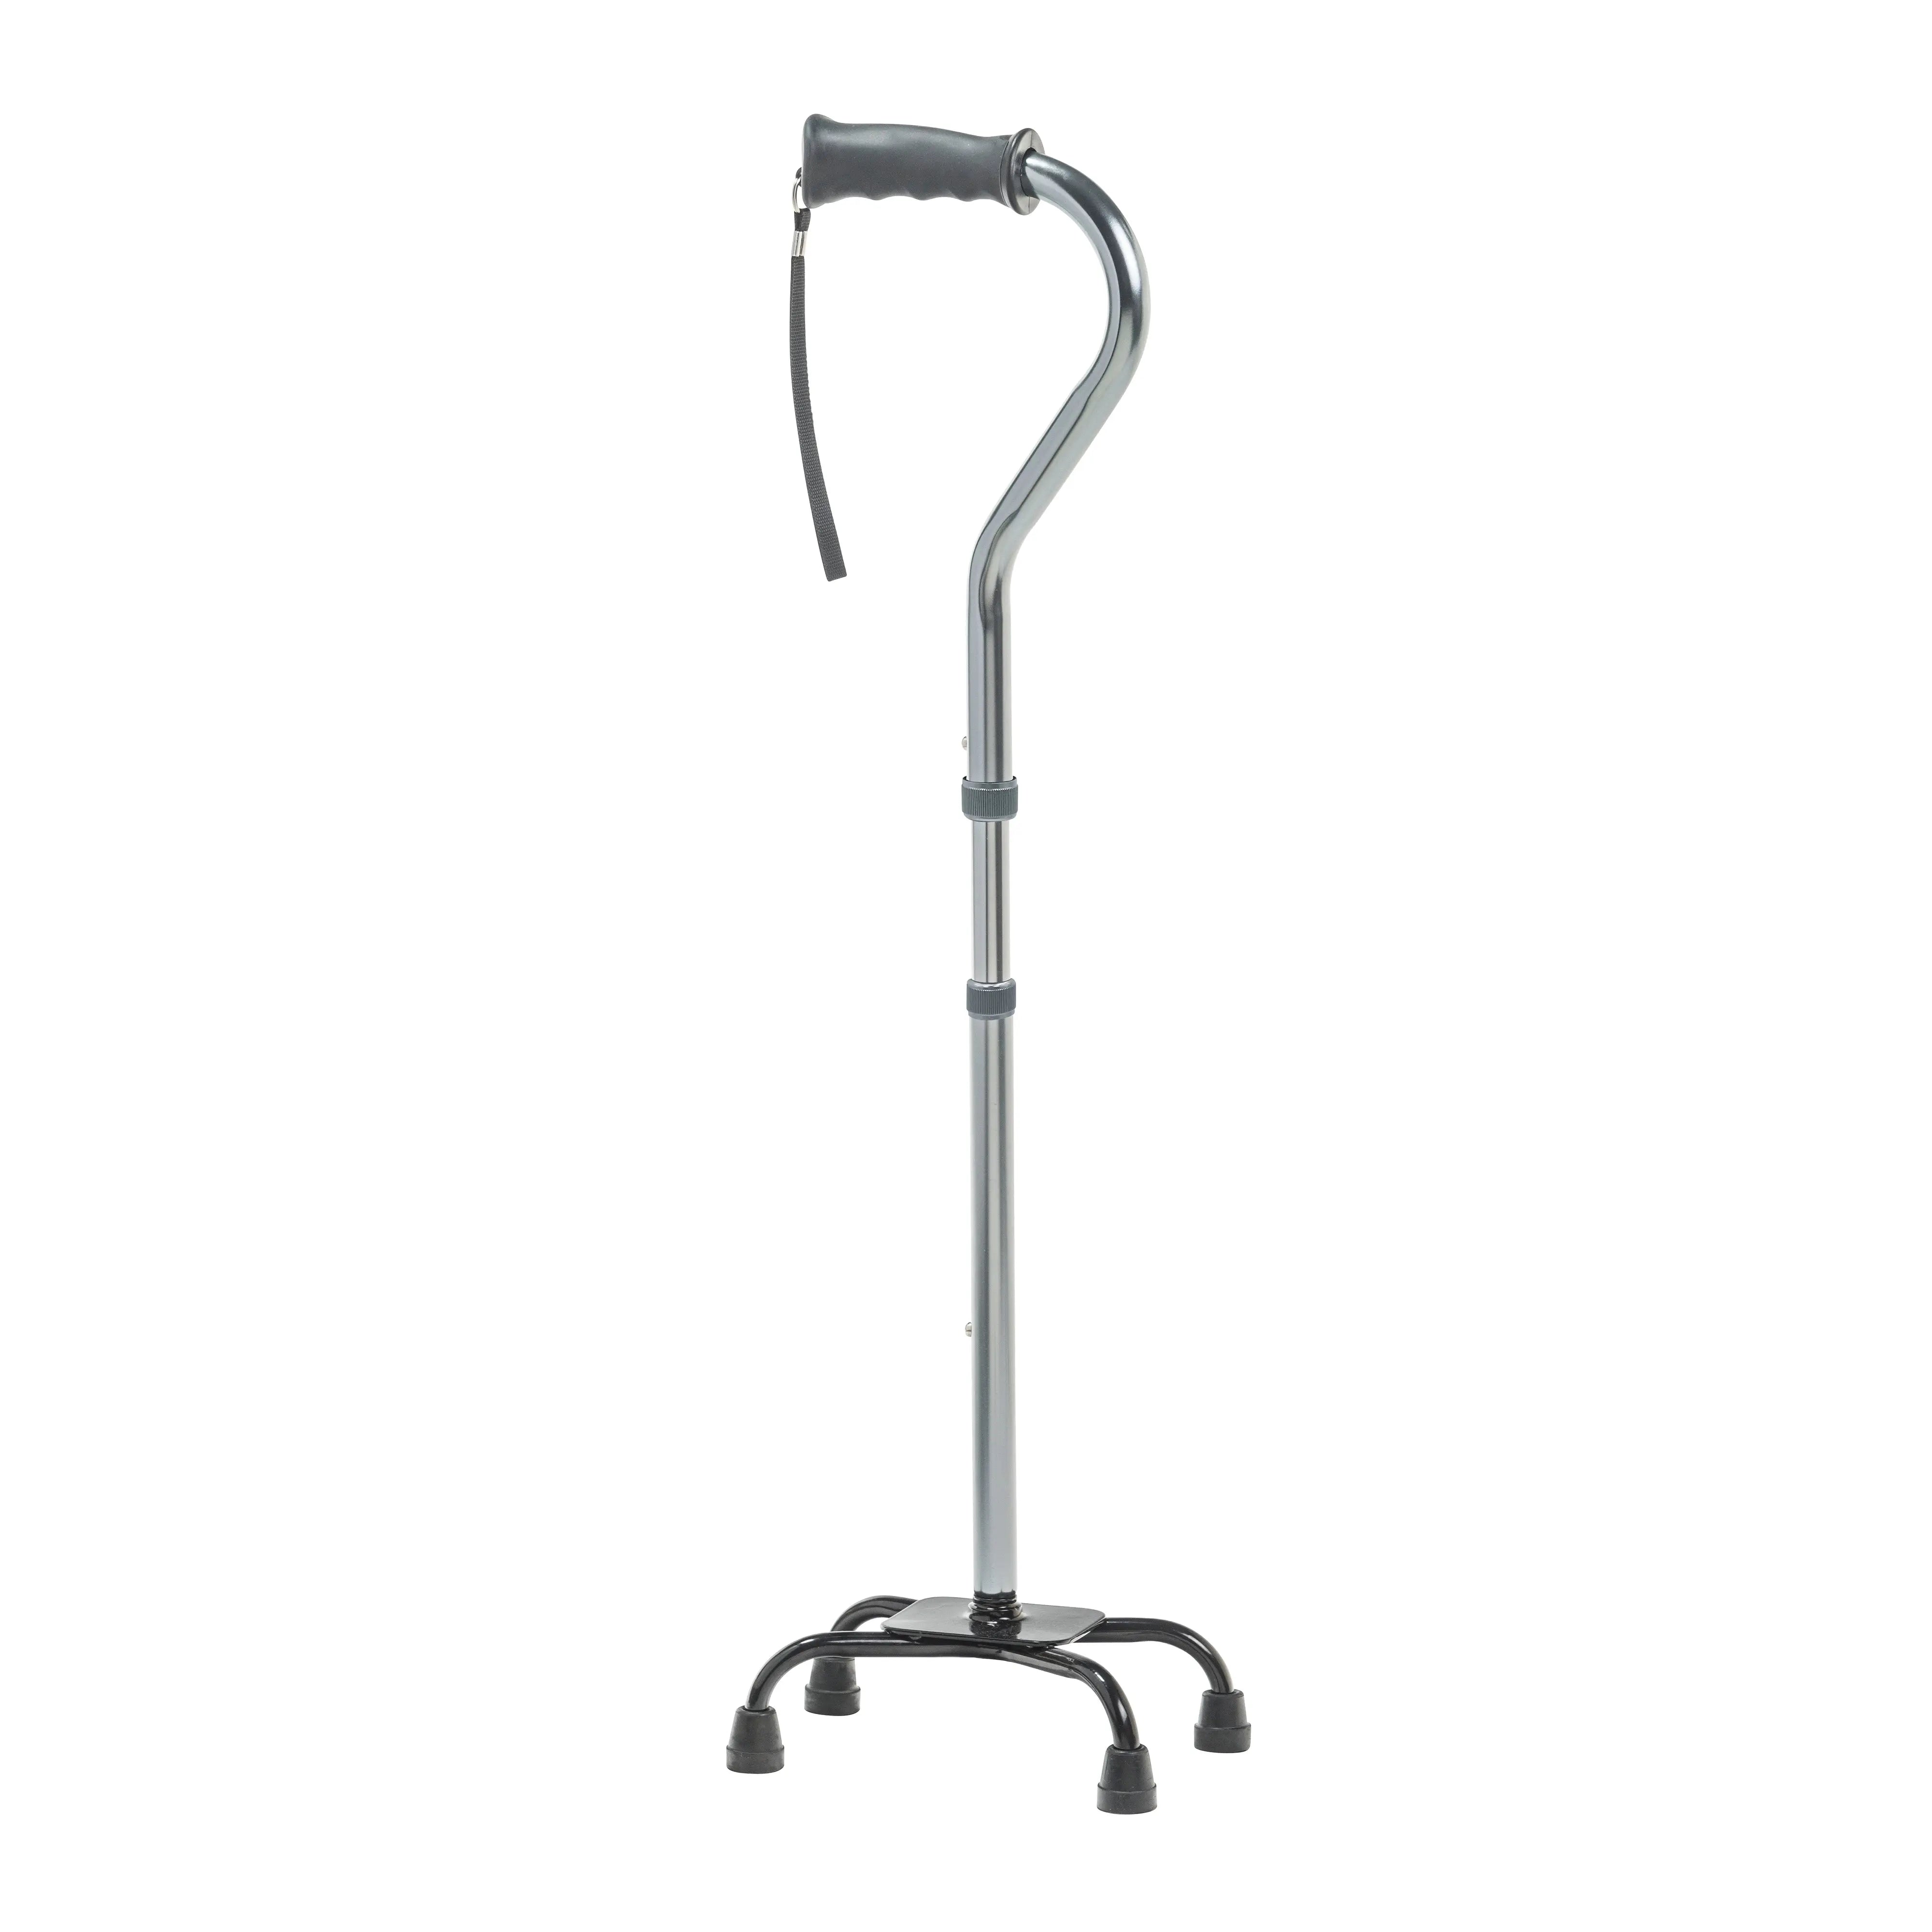 Royal Care Blind Cane Price in India - Buy Royal Care Blind Cane